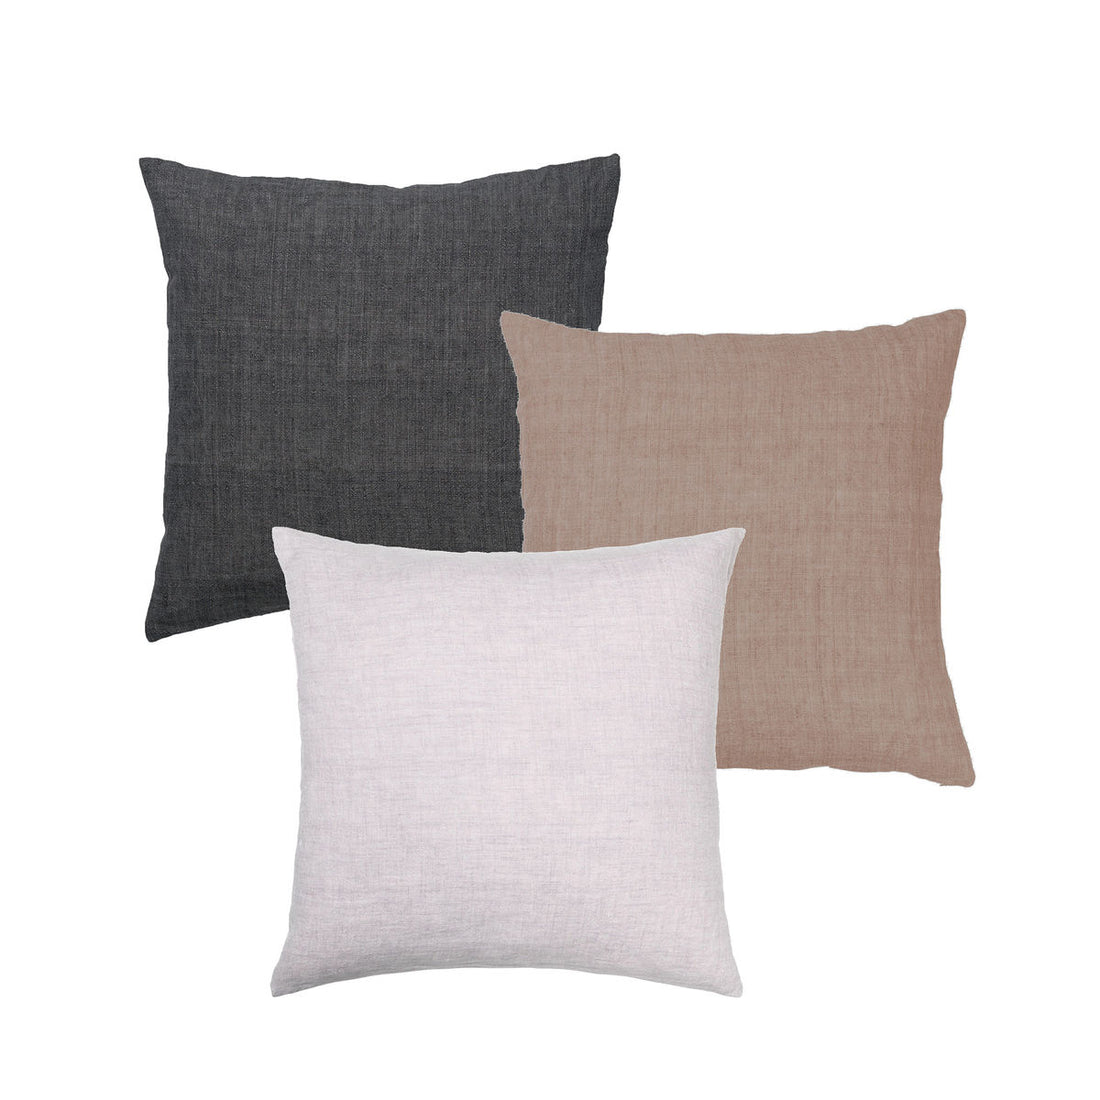 Cozy Living Luxury Linen Cushion Cover Mix incl. Inners